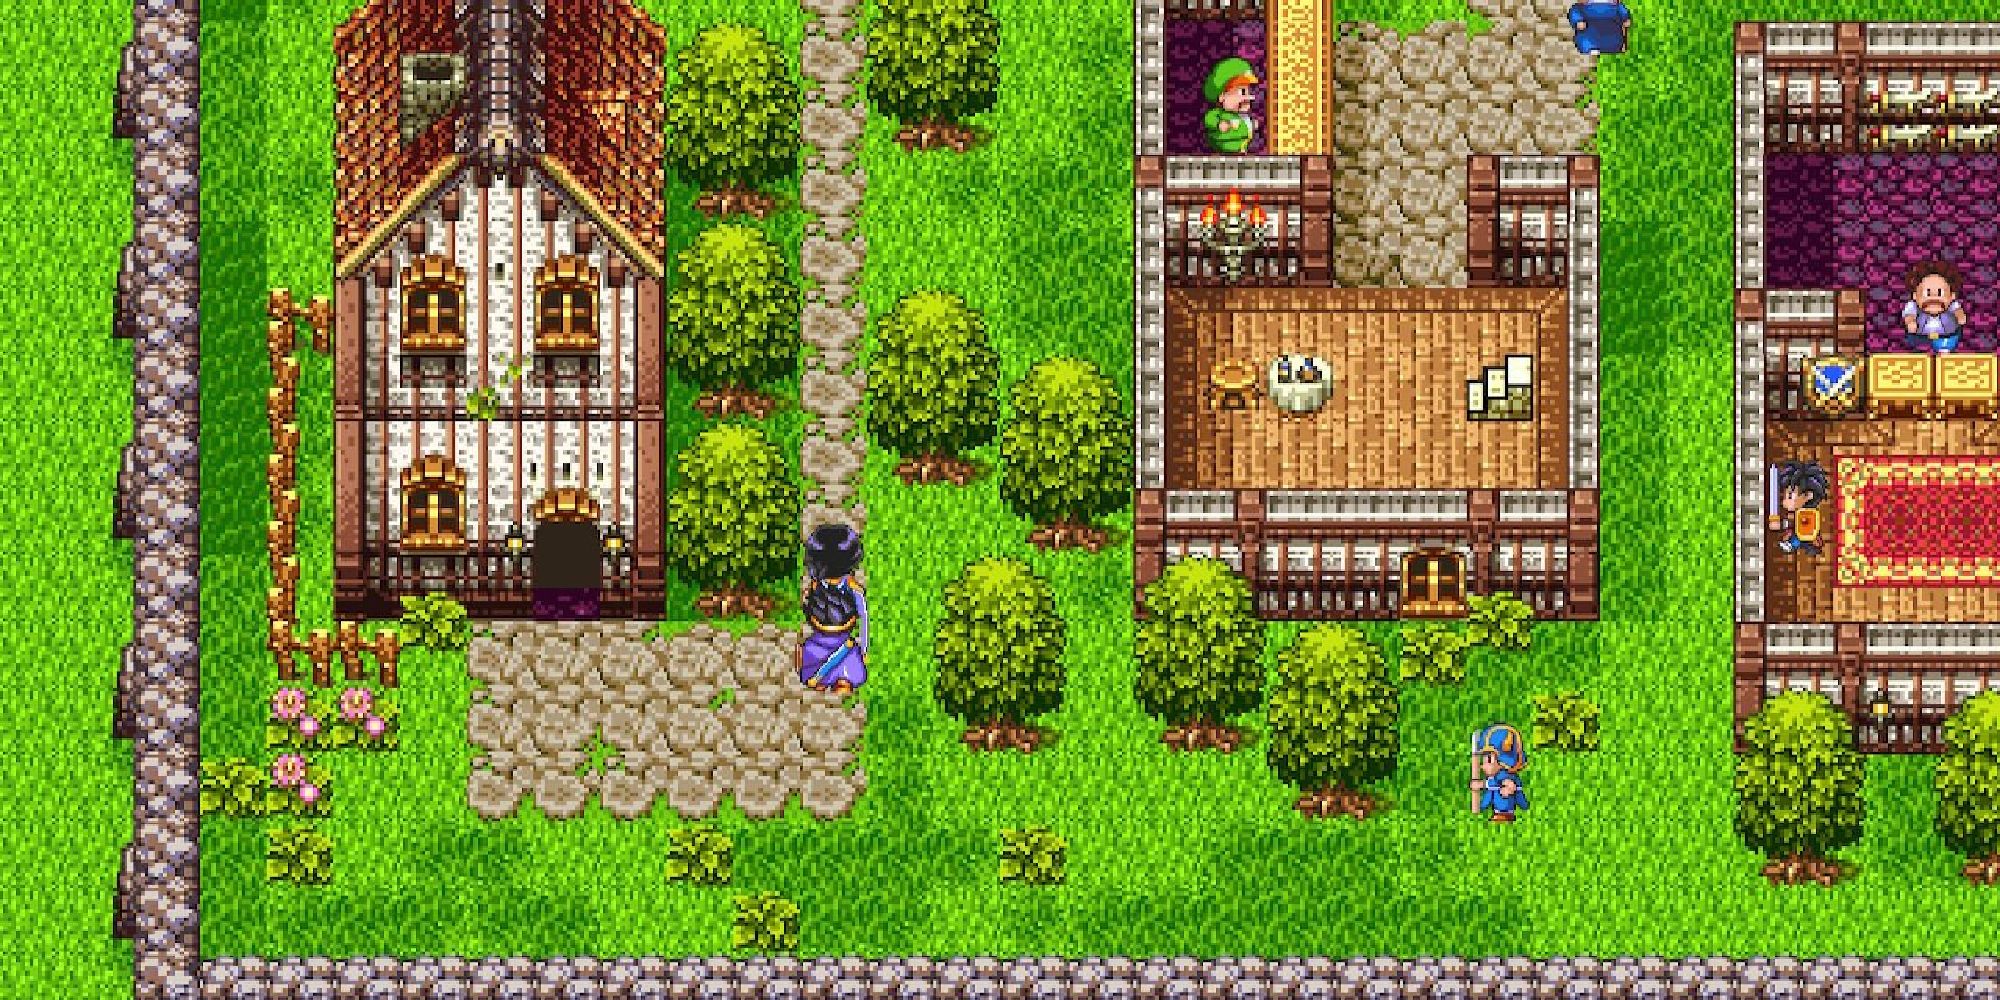 10-things-dragon-quest-still-does-better-than-other-rpgs